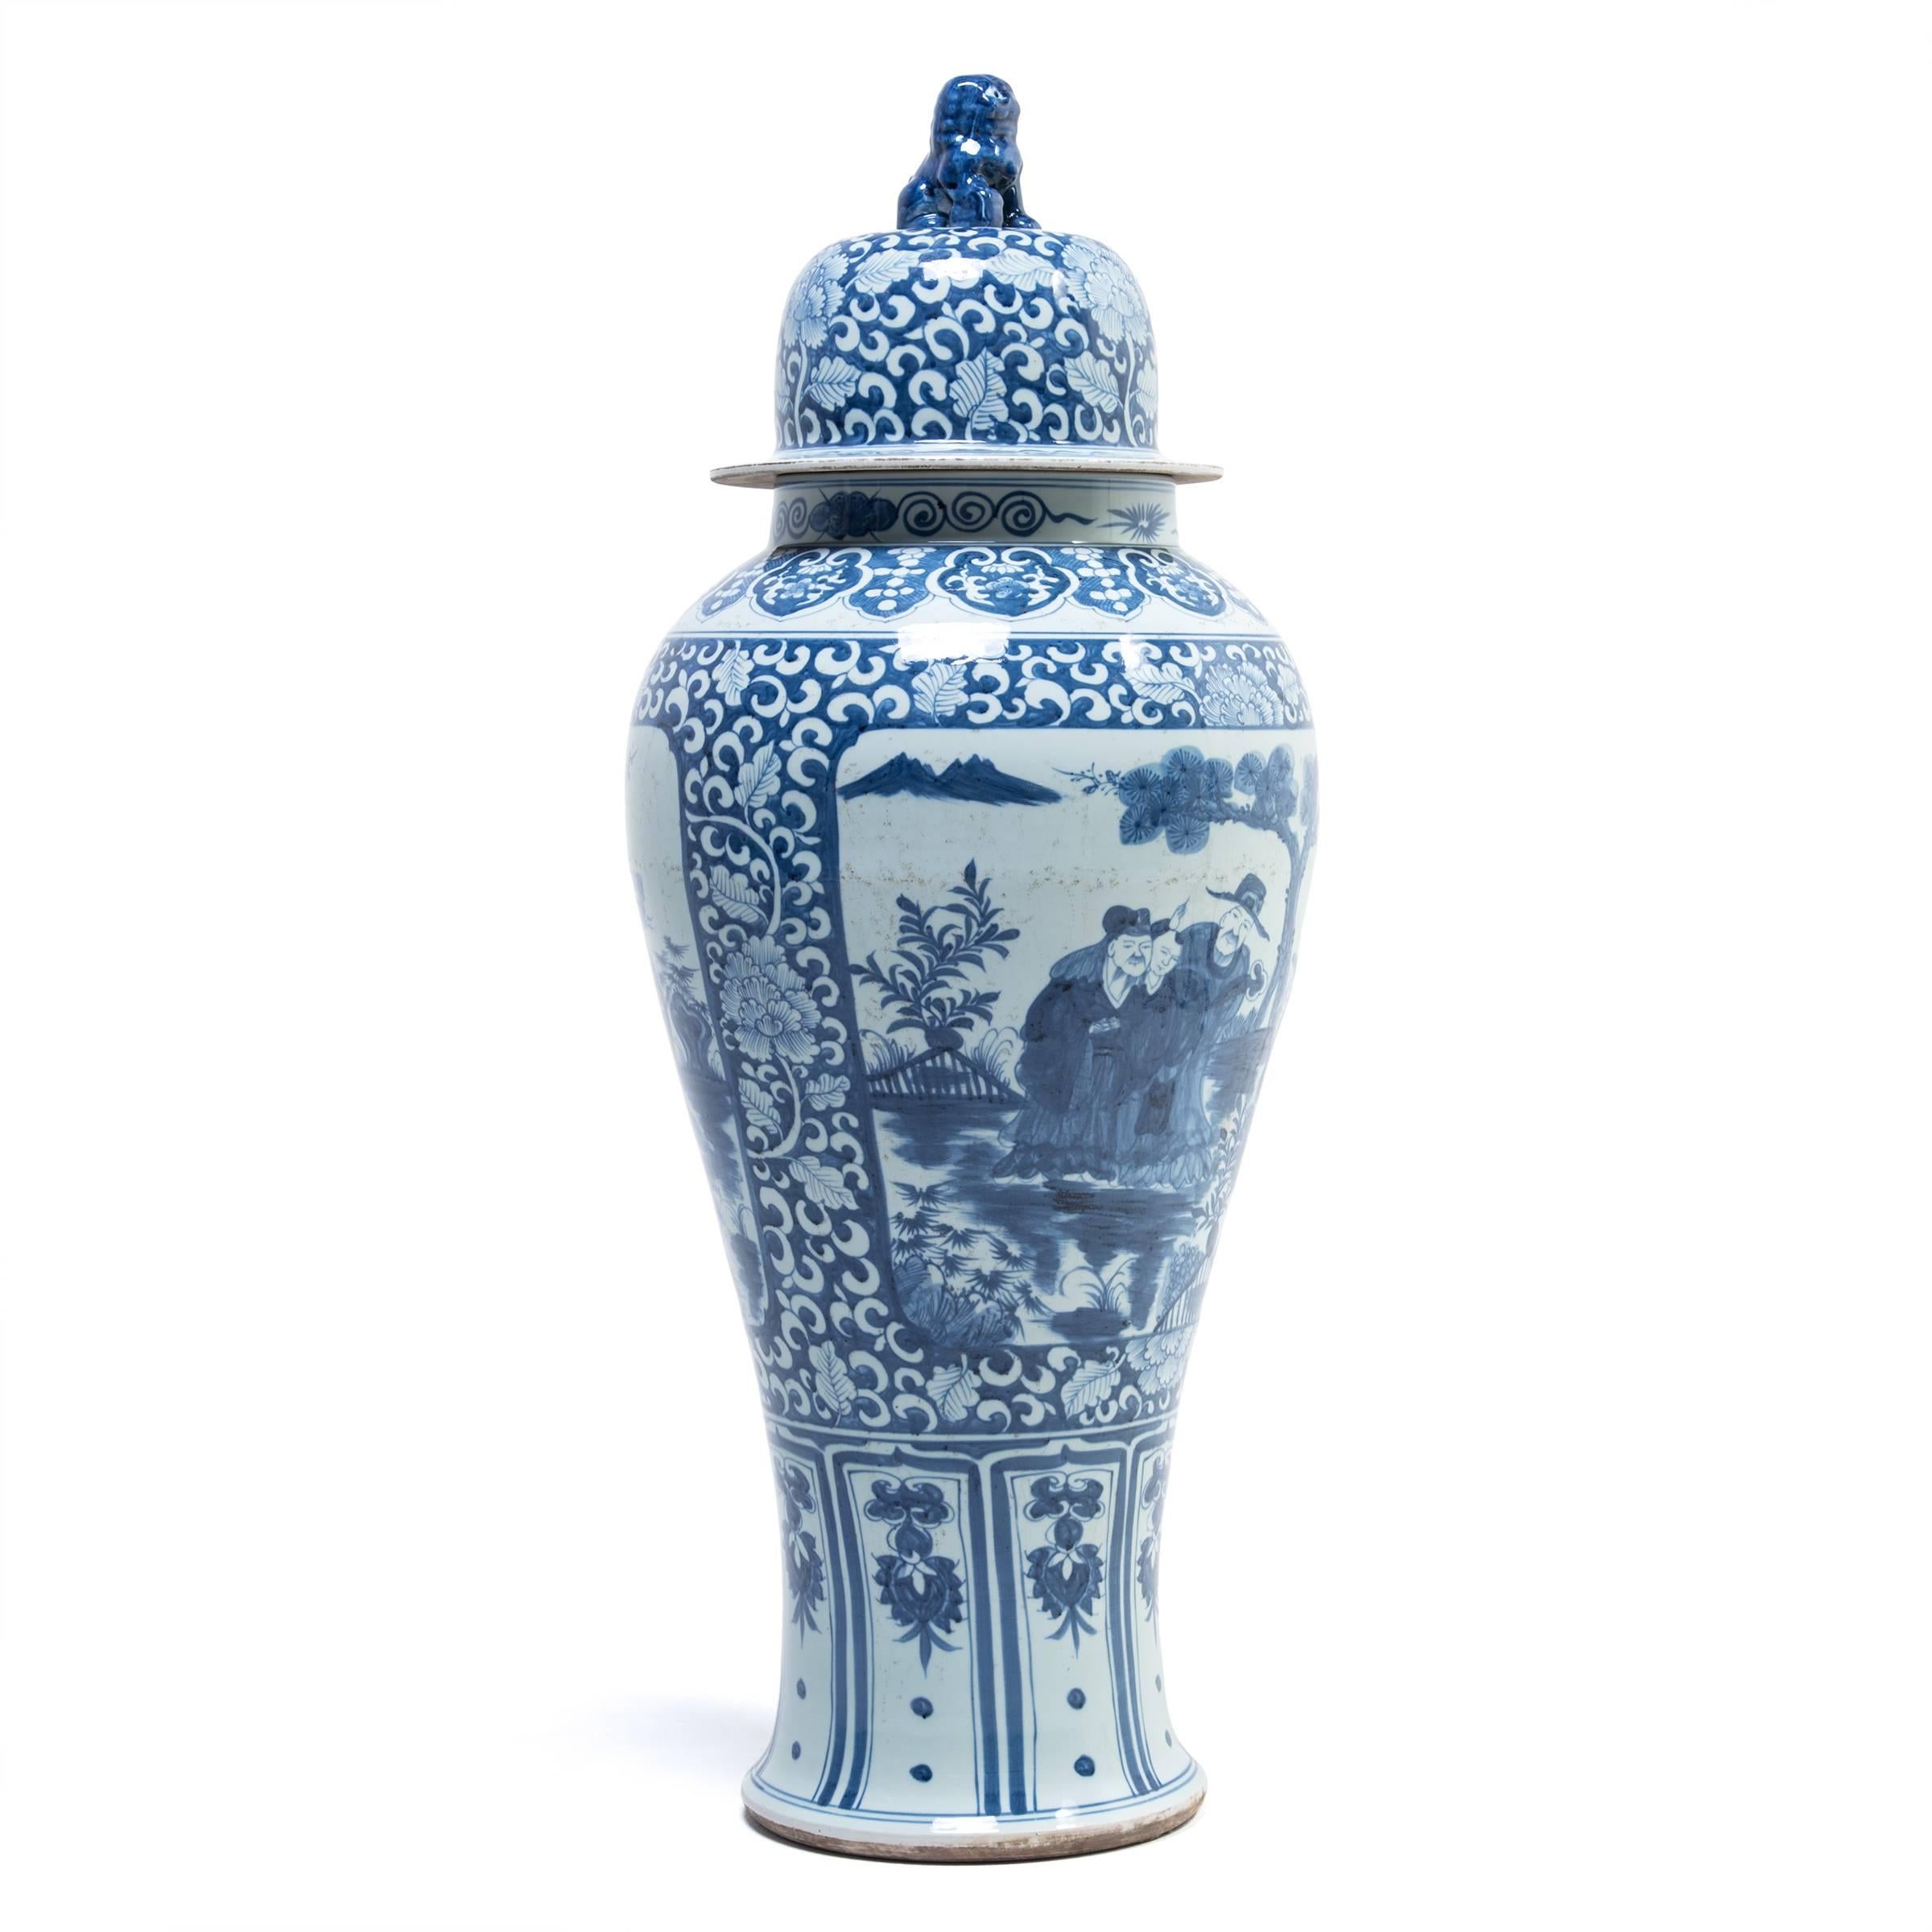 Chinese blue-and-white porcelain has inspired ceramists worldwide since cobalt was first introduced to China from the Middle East thousands of years ago. This contemporary example of a traditional ginger jar was artisan made in Jiangxi province.